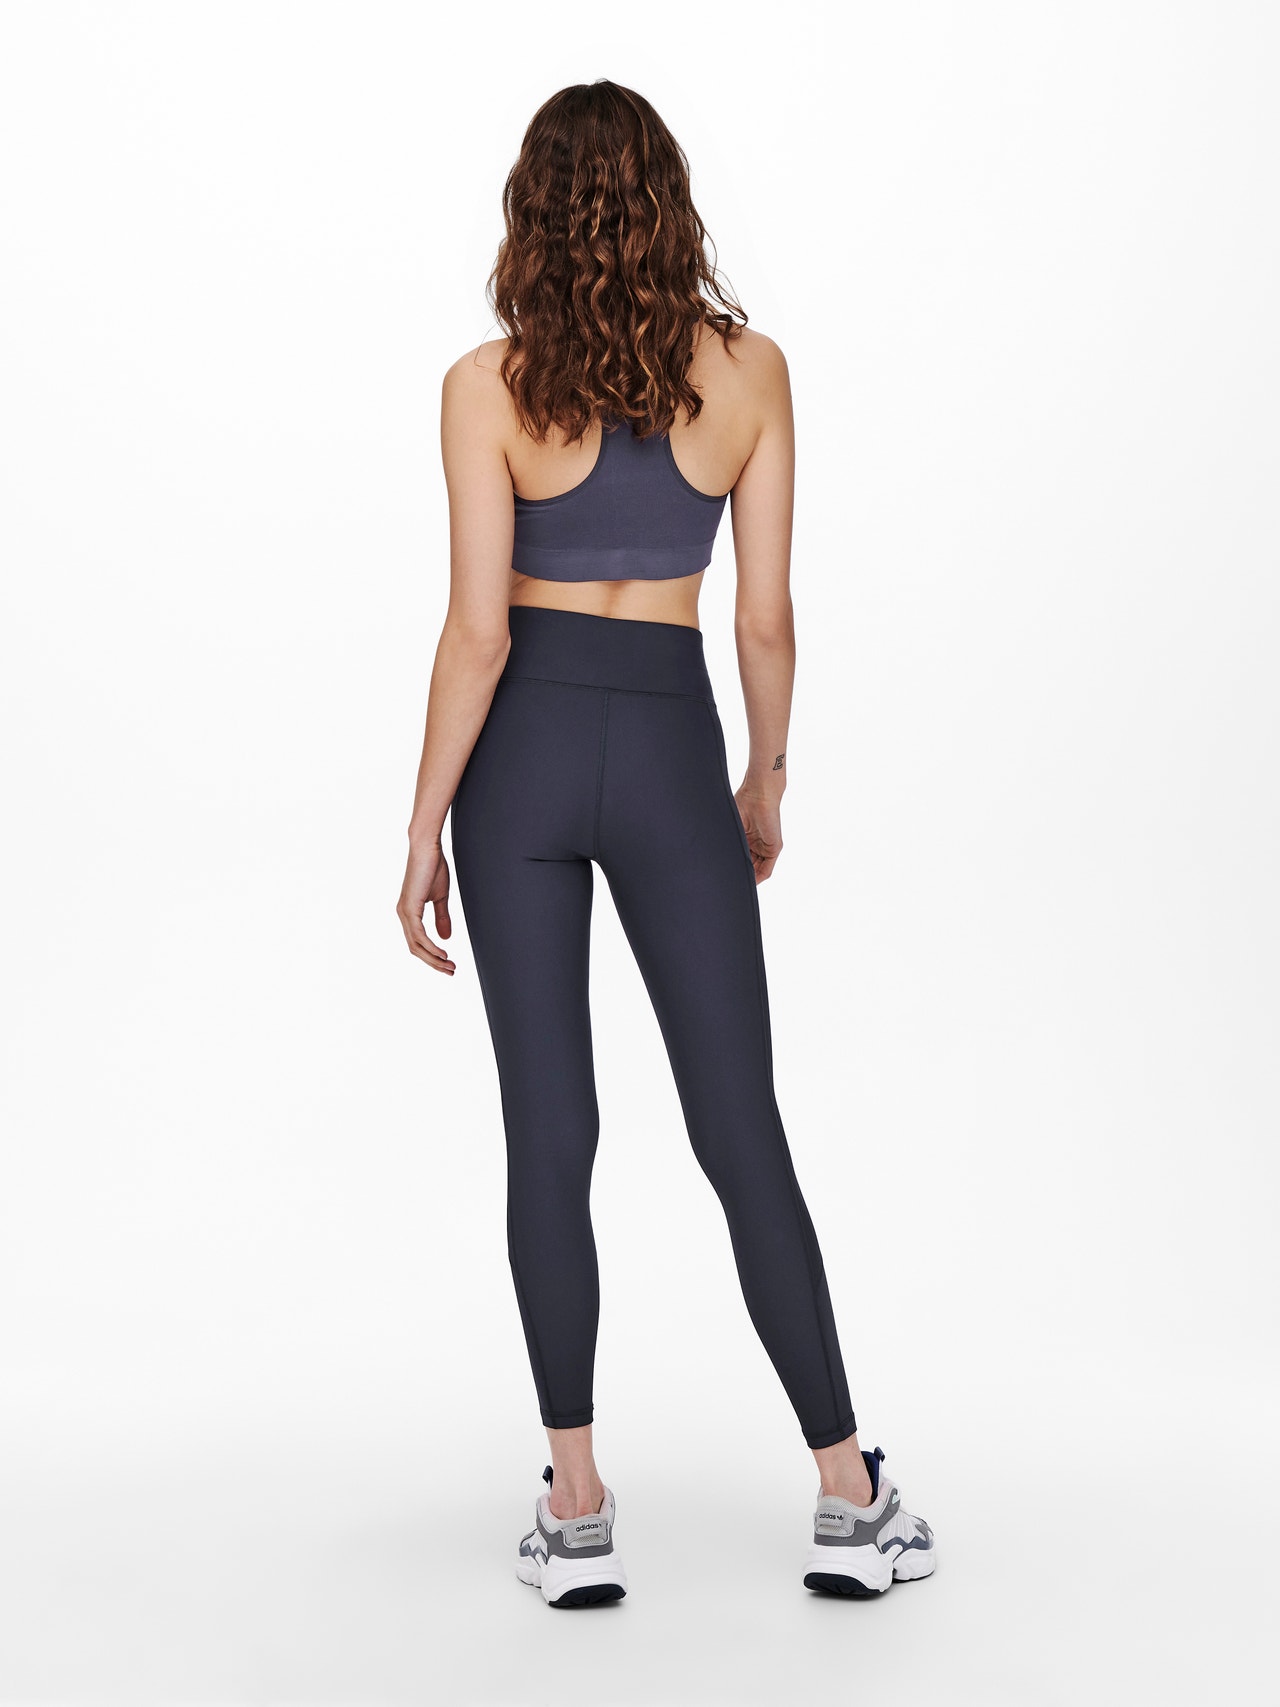 ONLY Tight fit High waist Legging -Blue Nights - 15207648